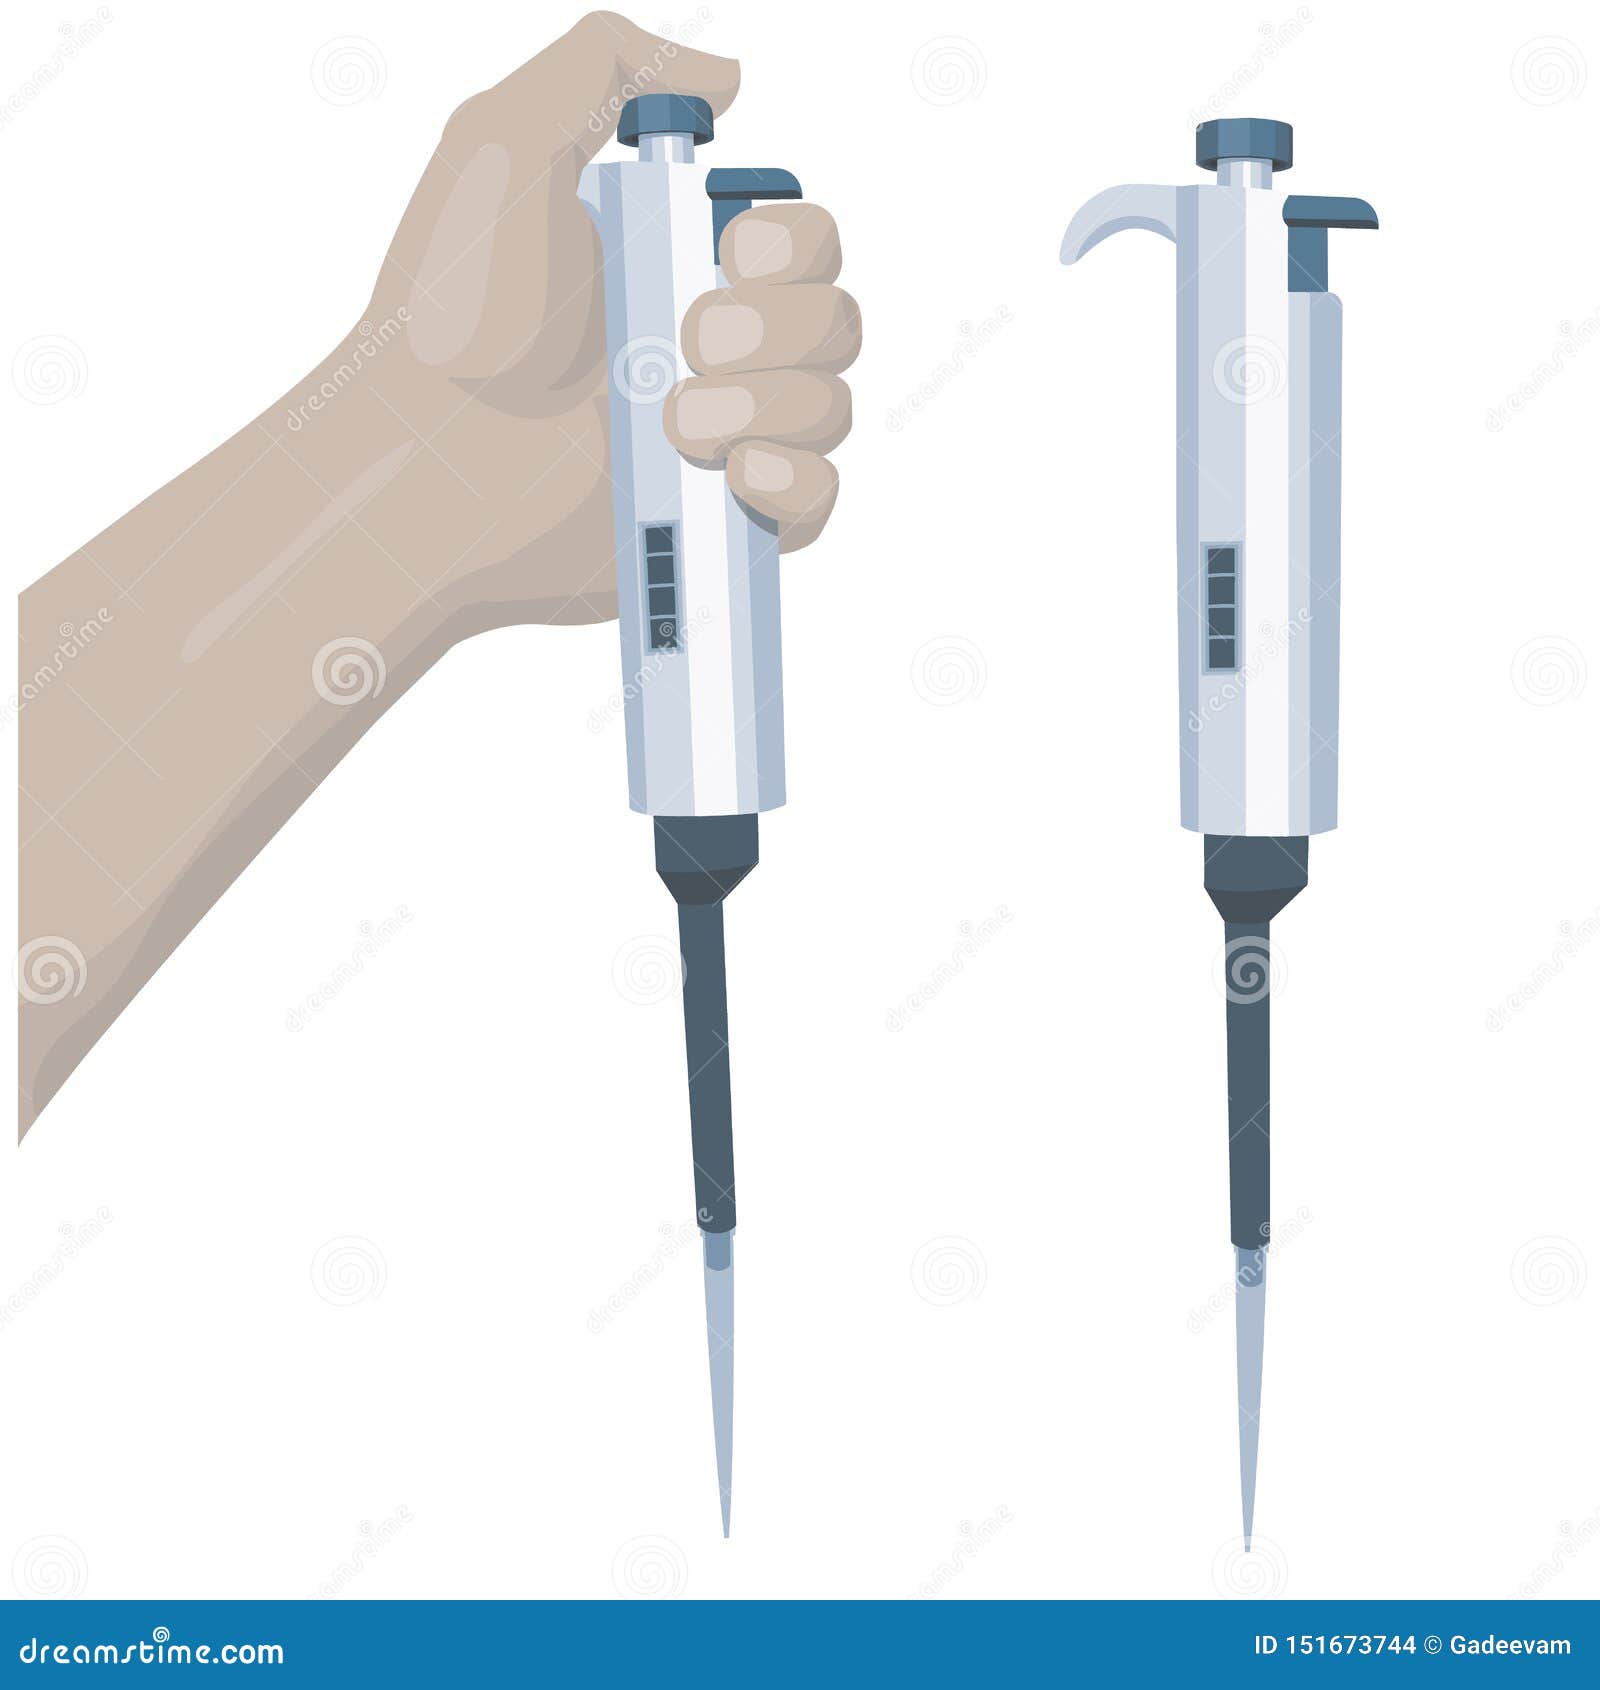 autoclavable pipette with a tip